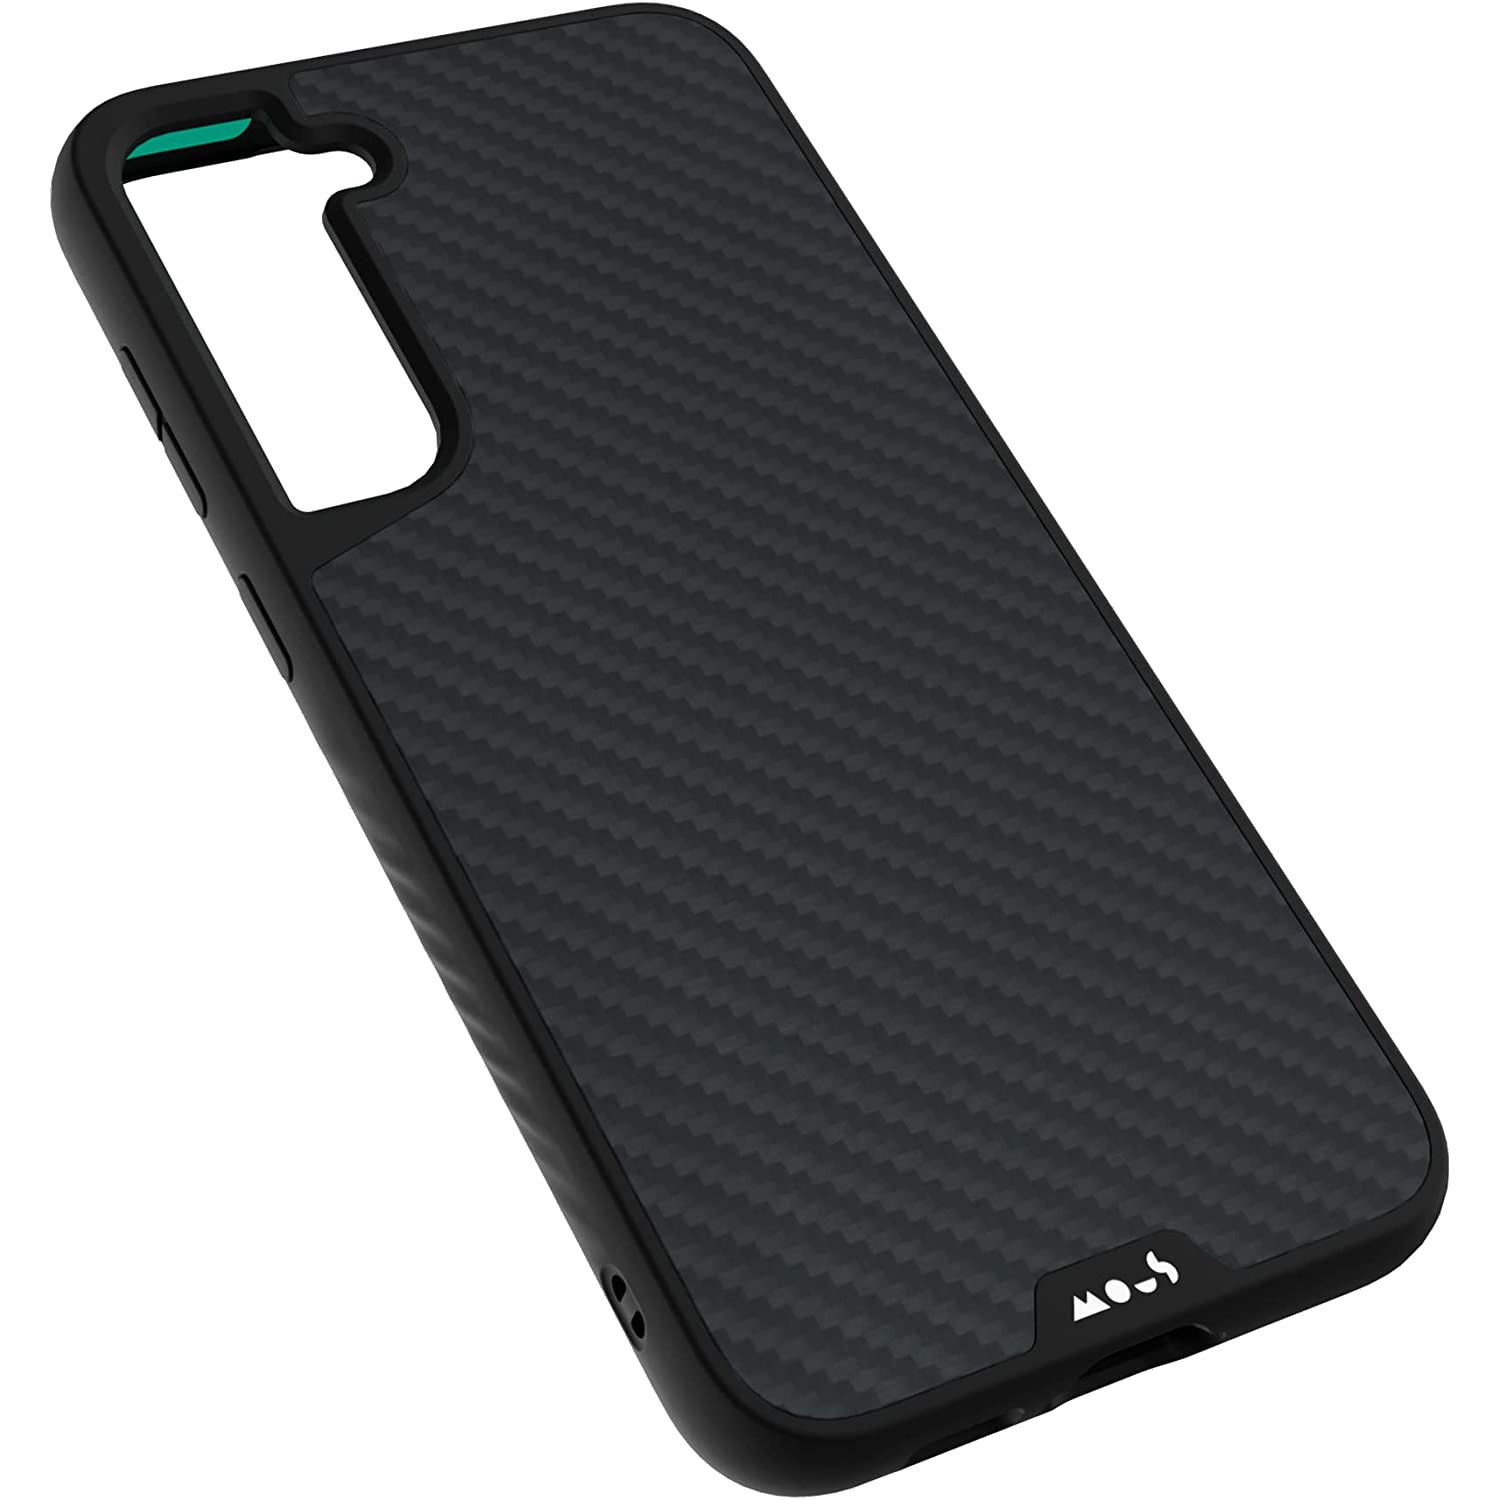 Scratched Camera Woes? Pitaka S24 Ultra Case Saves the Day